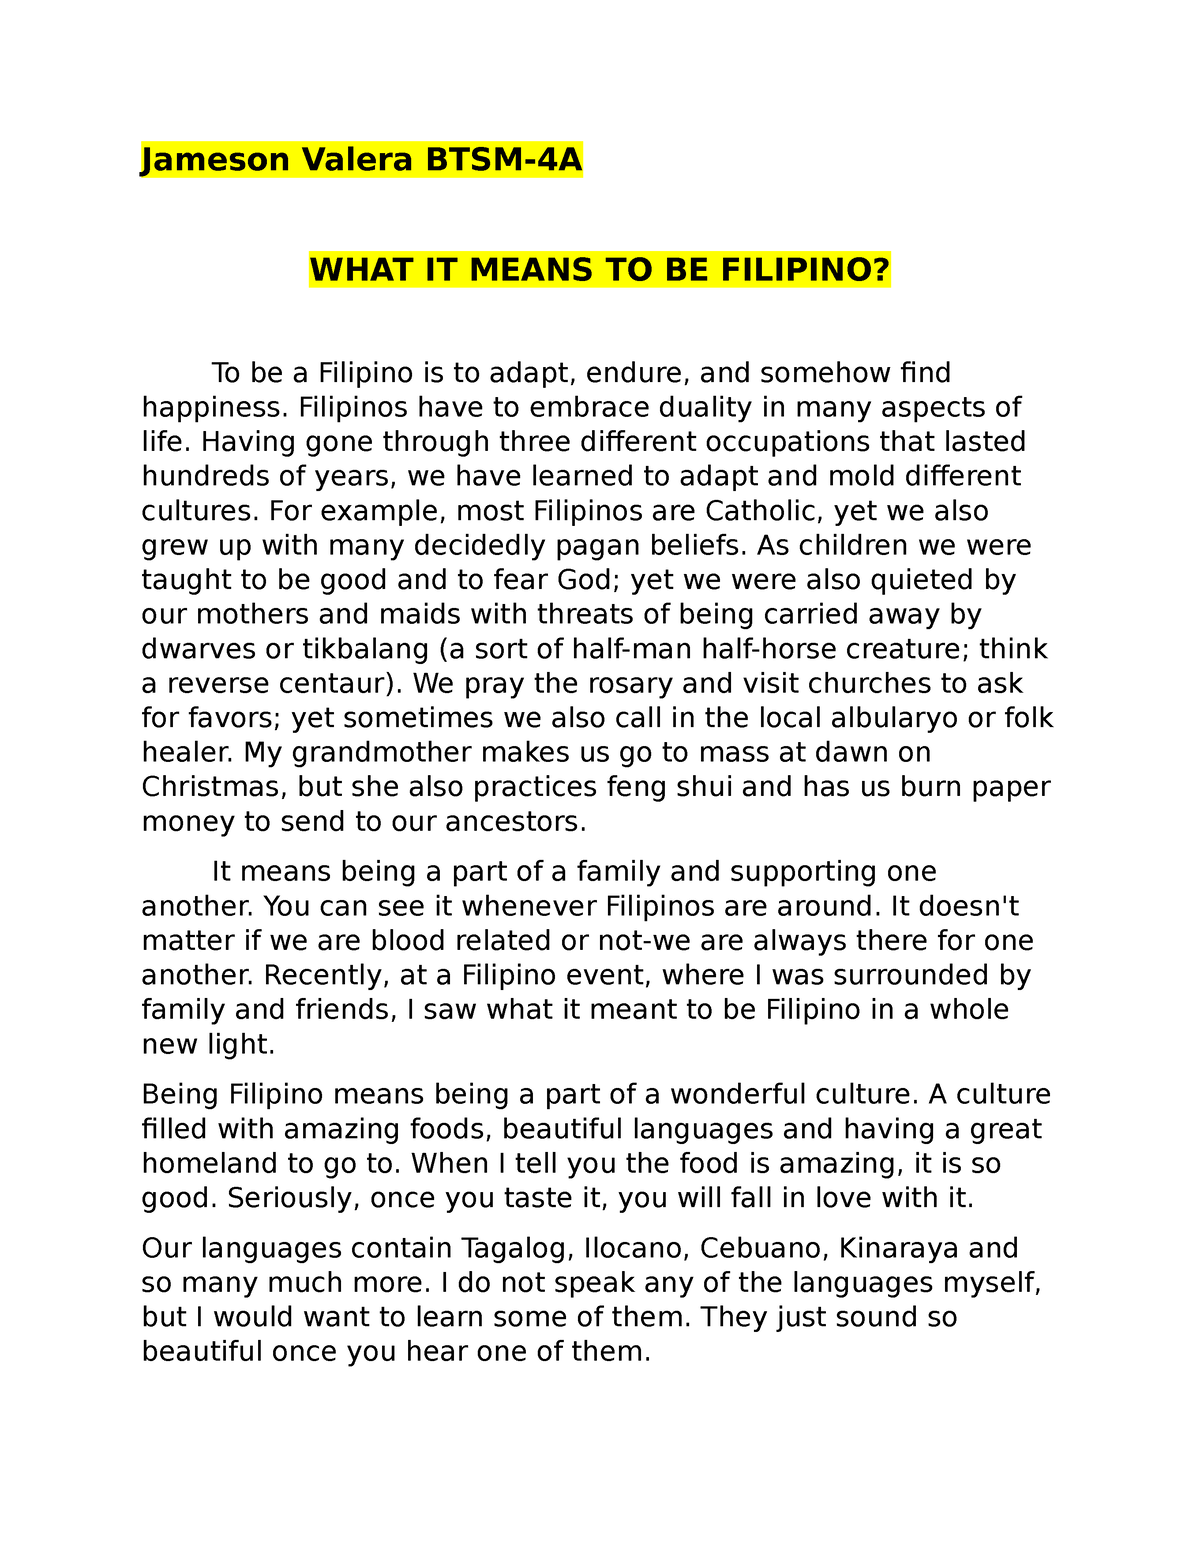 definition essay on the filipino concept pasyon